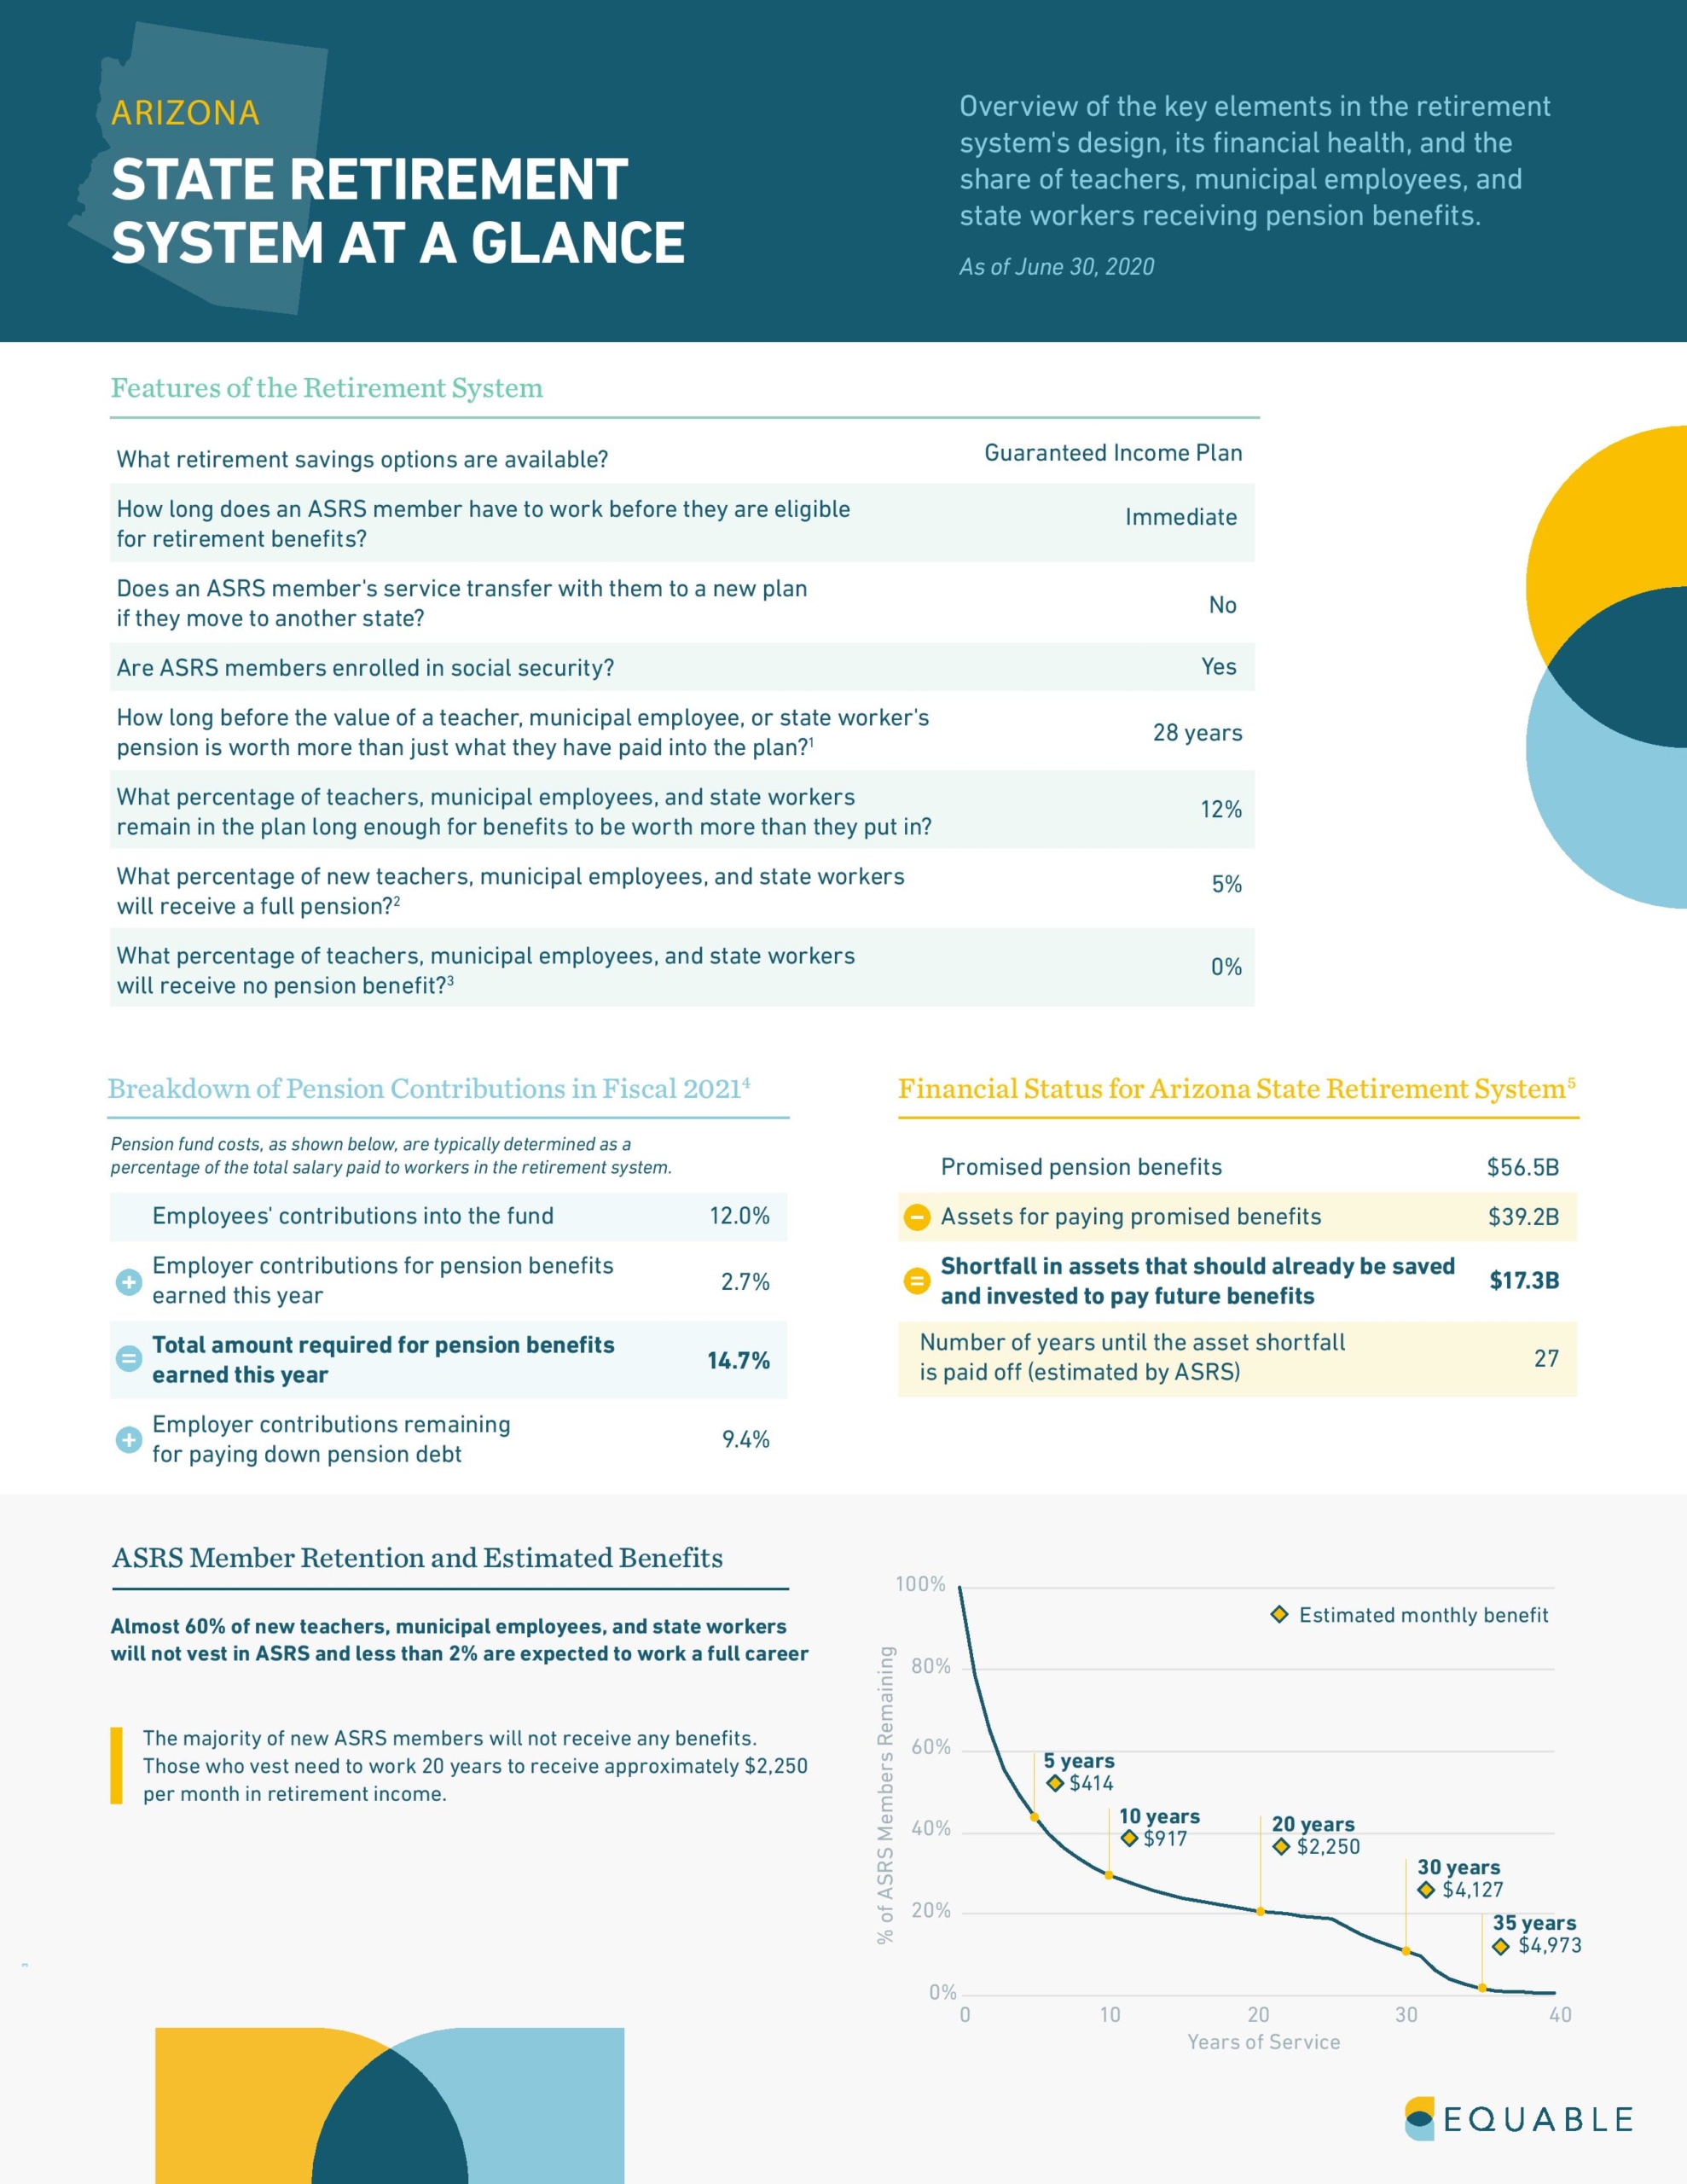 Arizona State Retirement System at a Glance